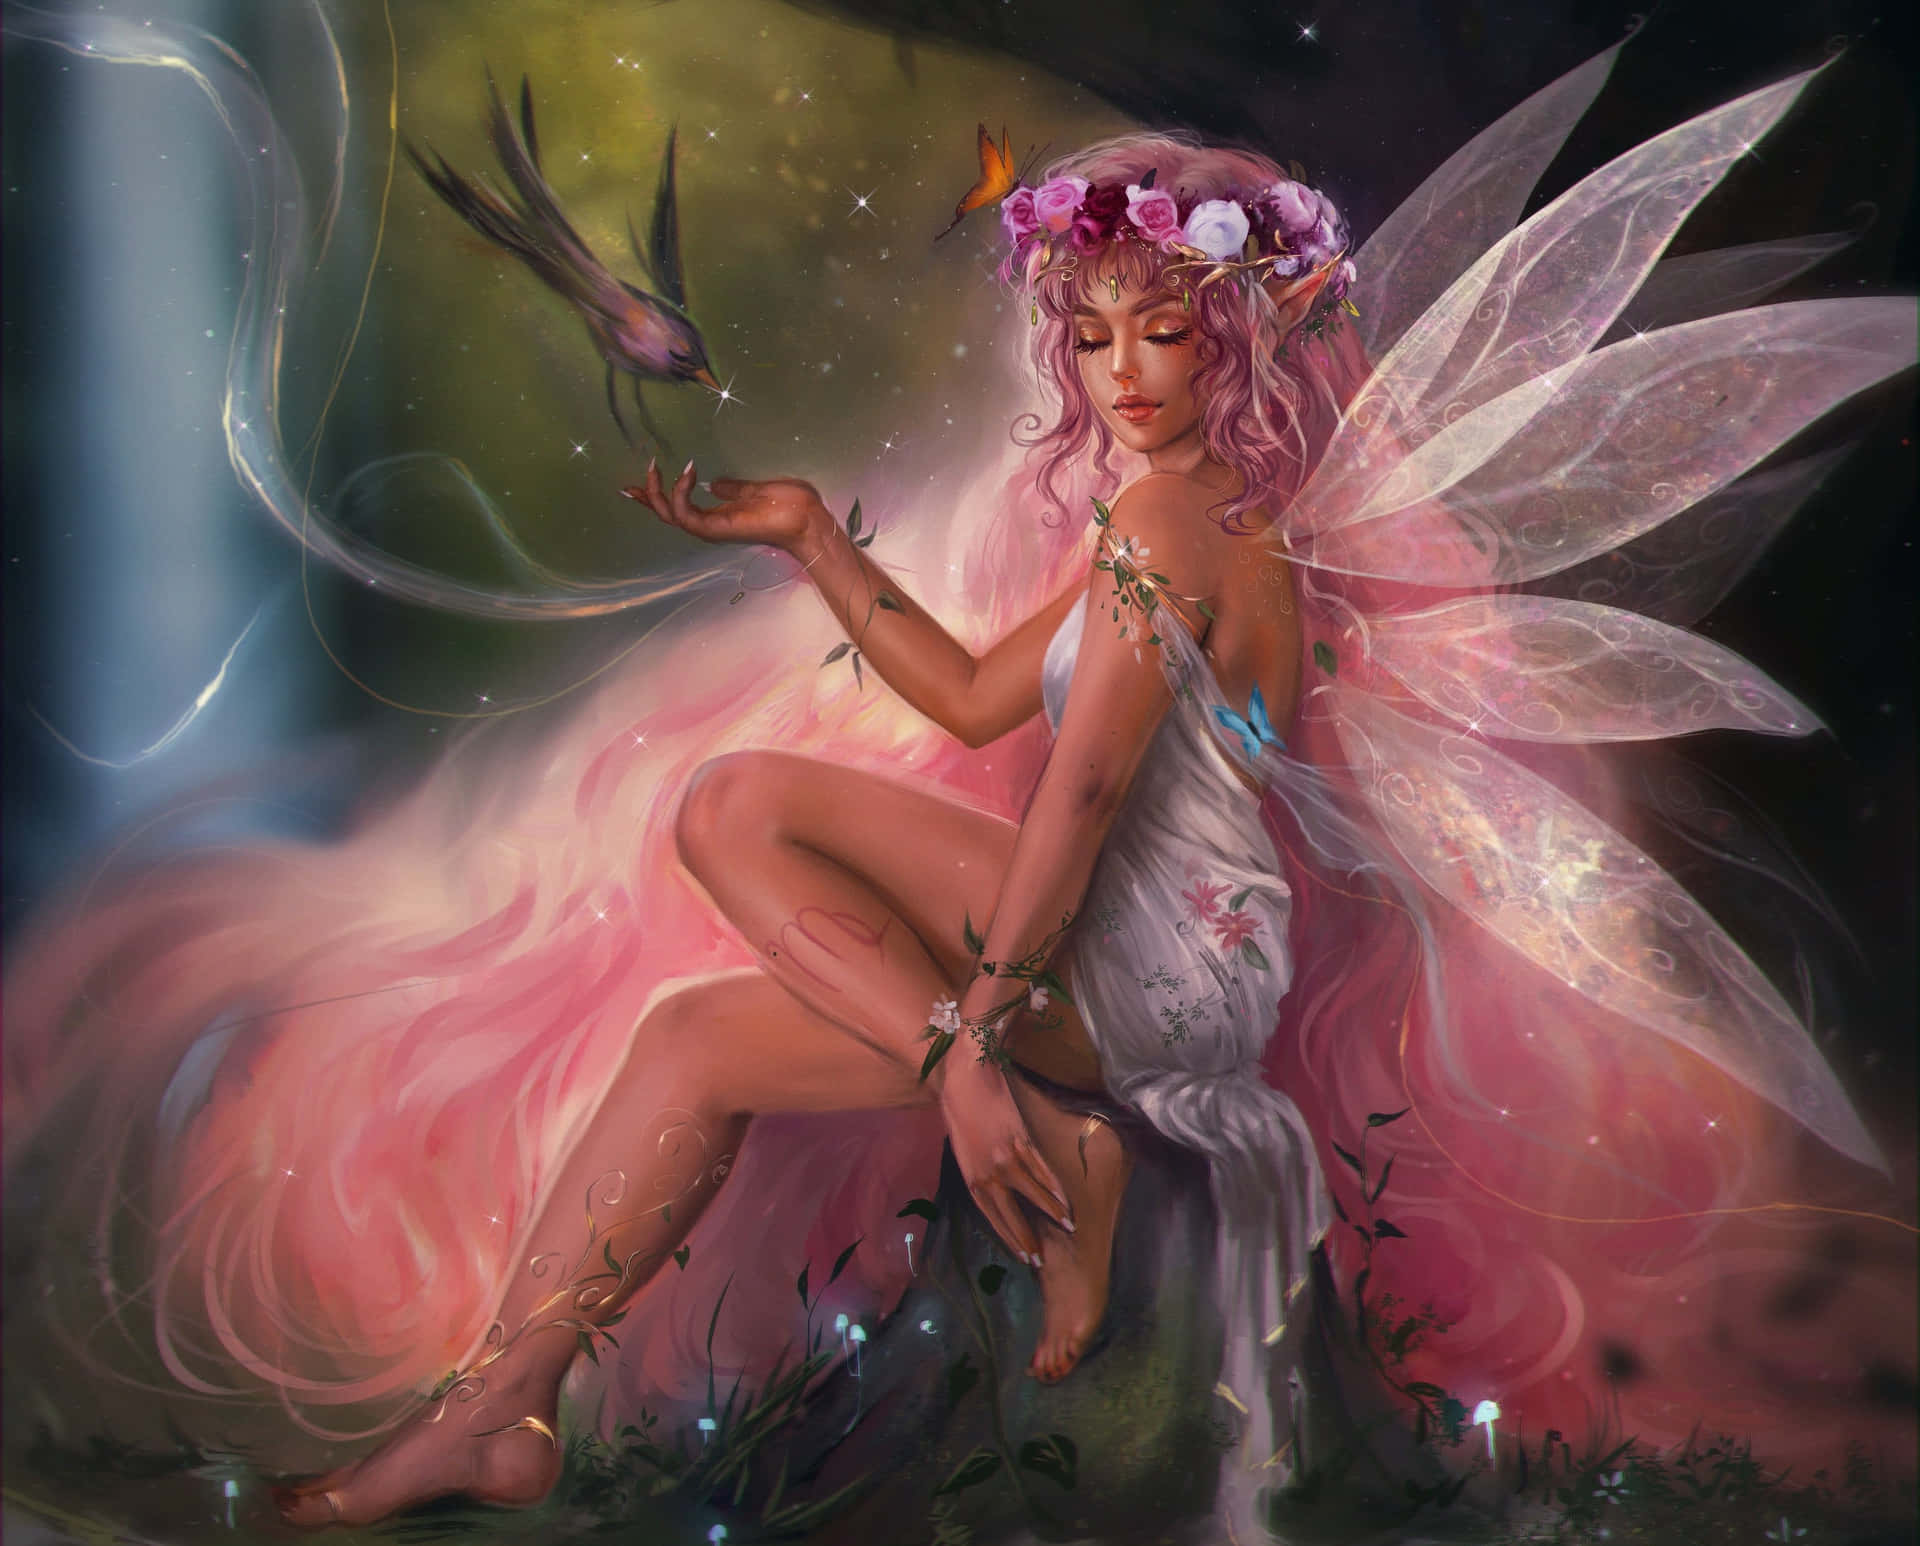 "A Fairy Surrounded by Magical Glitter"